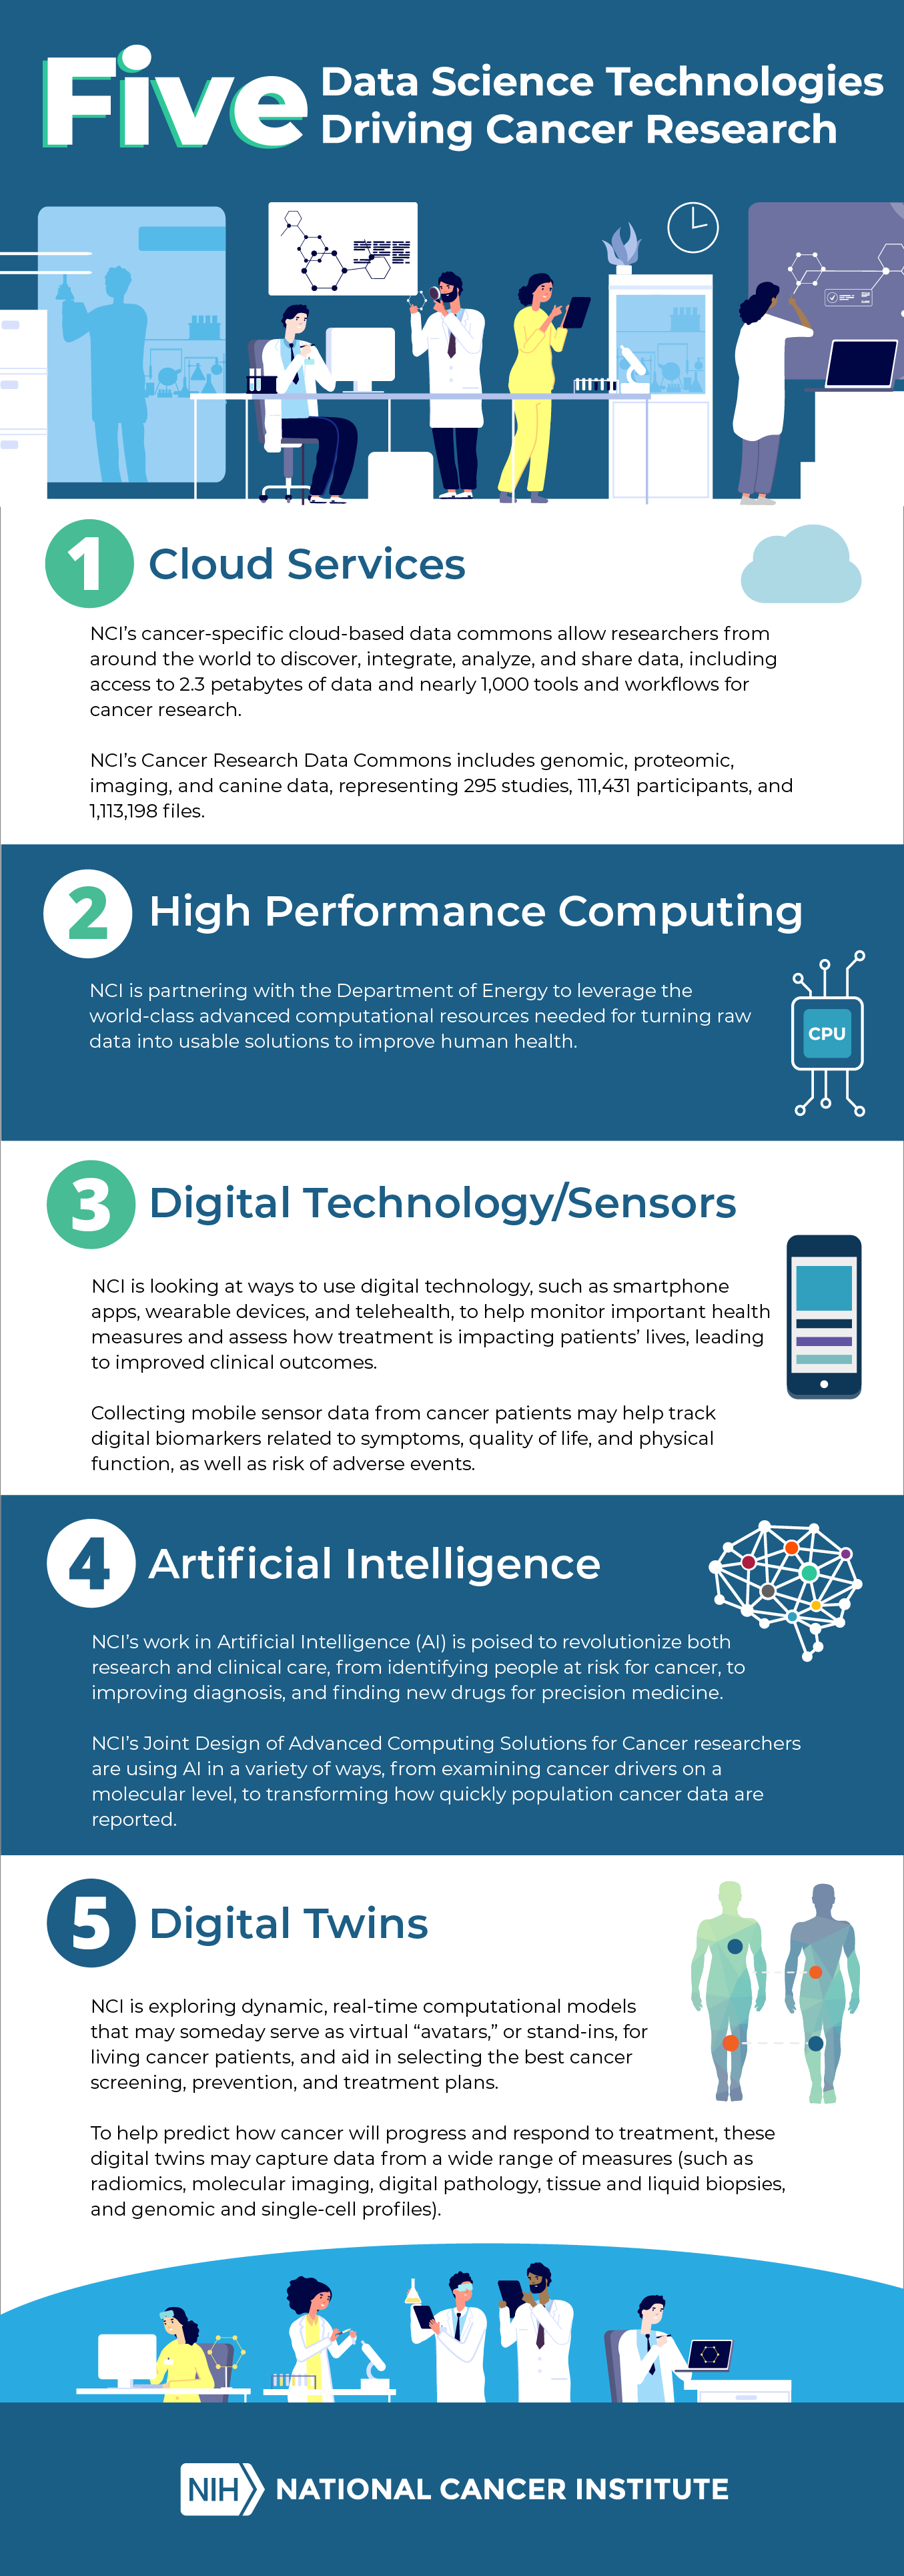 The 5 Data Science Technologies Driving Cancer Research are: 1. Cloud Services   2. High Performance Computing 3. Digital Technology/Sensors 4. Artificial Intelligence 5. Digital Twins